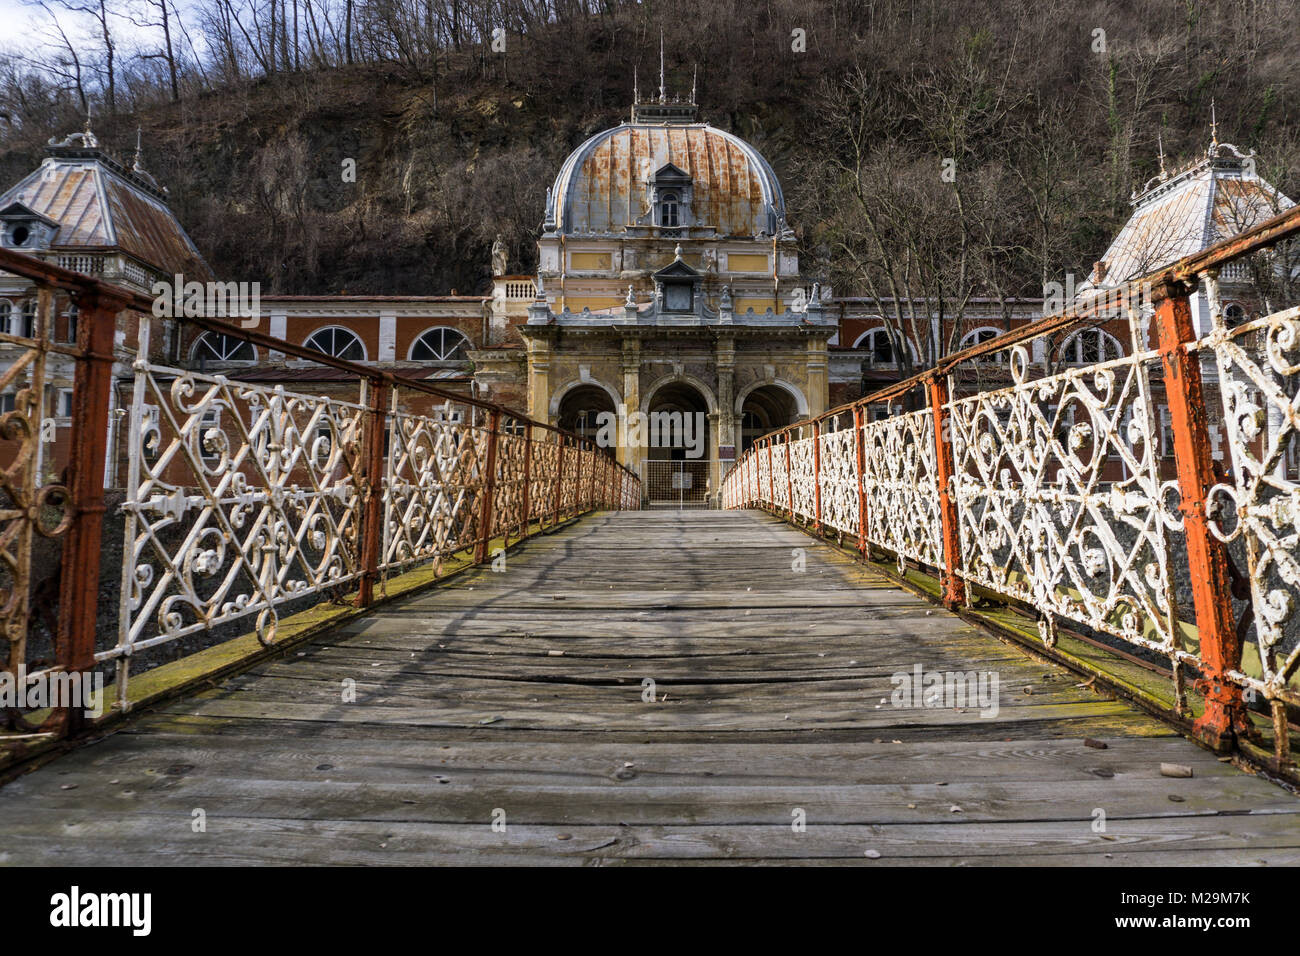 Baile Herculane, Romania - 01.01.2018: Closed bridge leading to the Neptune baths, once the spa retreat of Austrian nobility, today left in ruins. Stock Photo